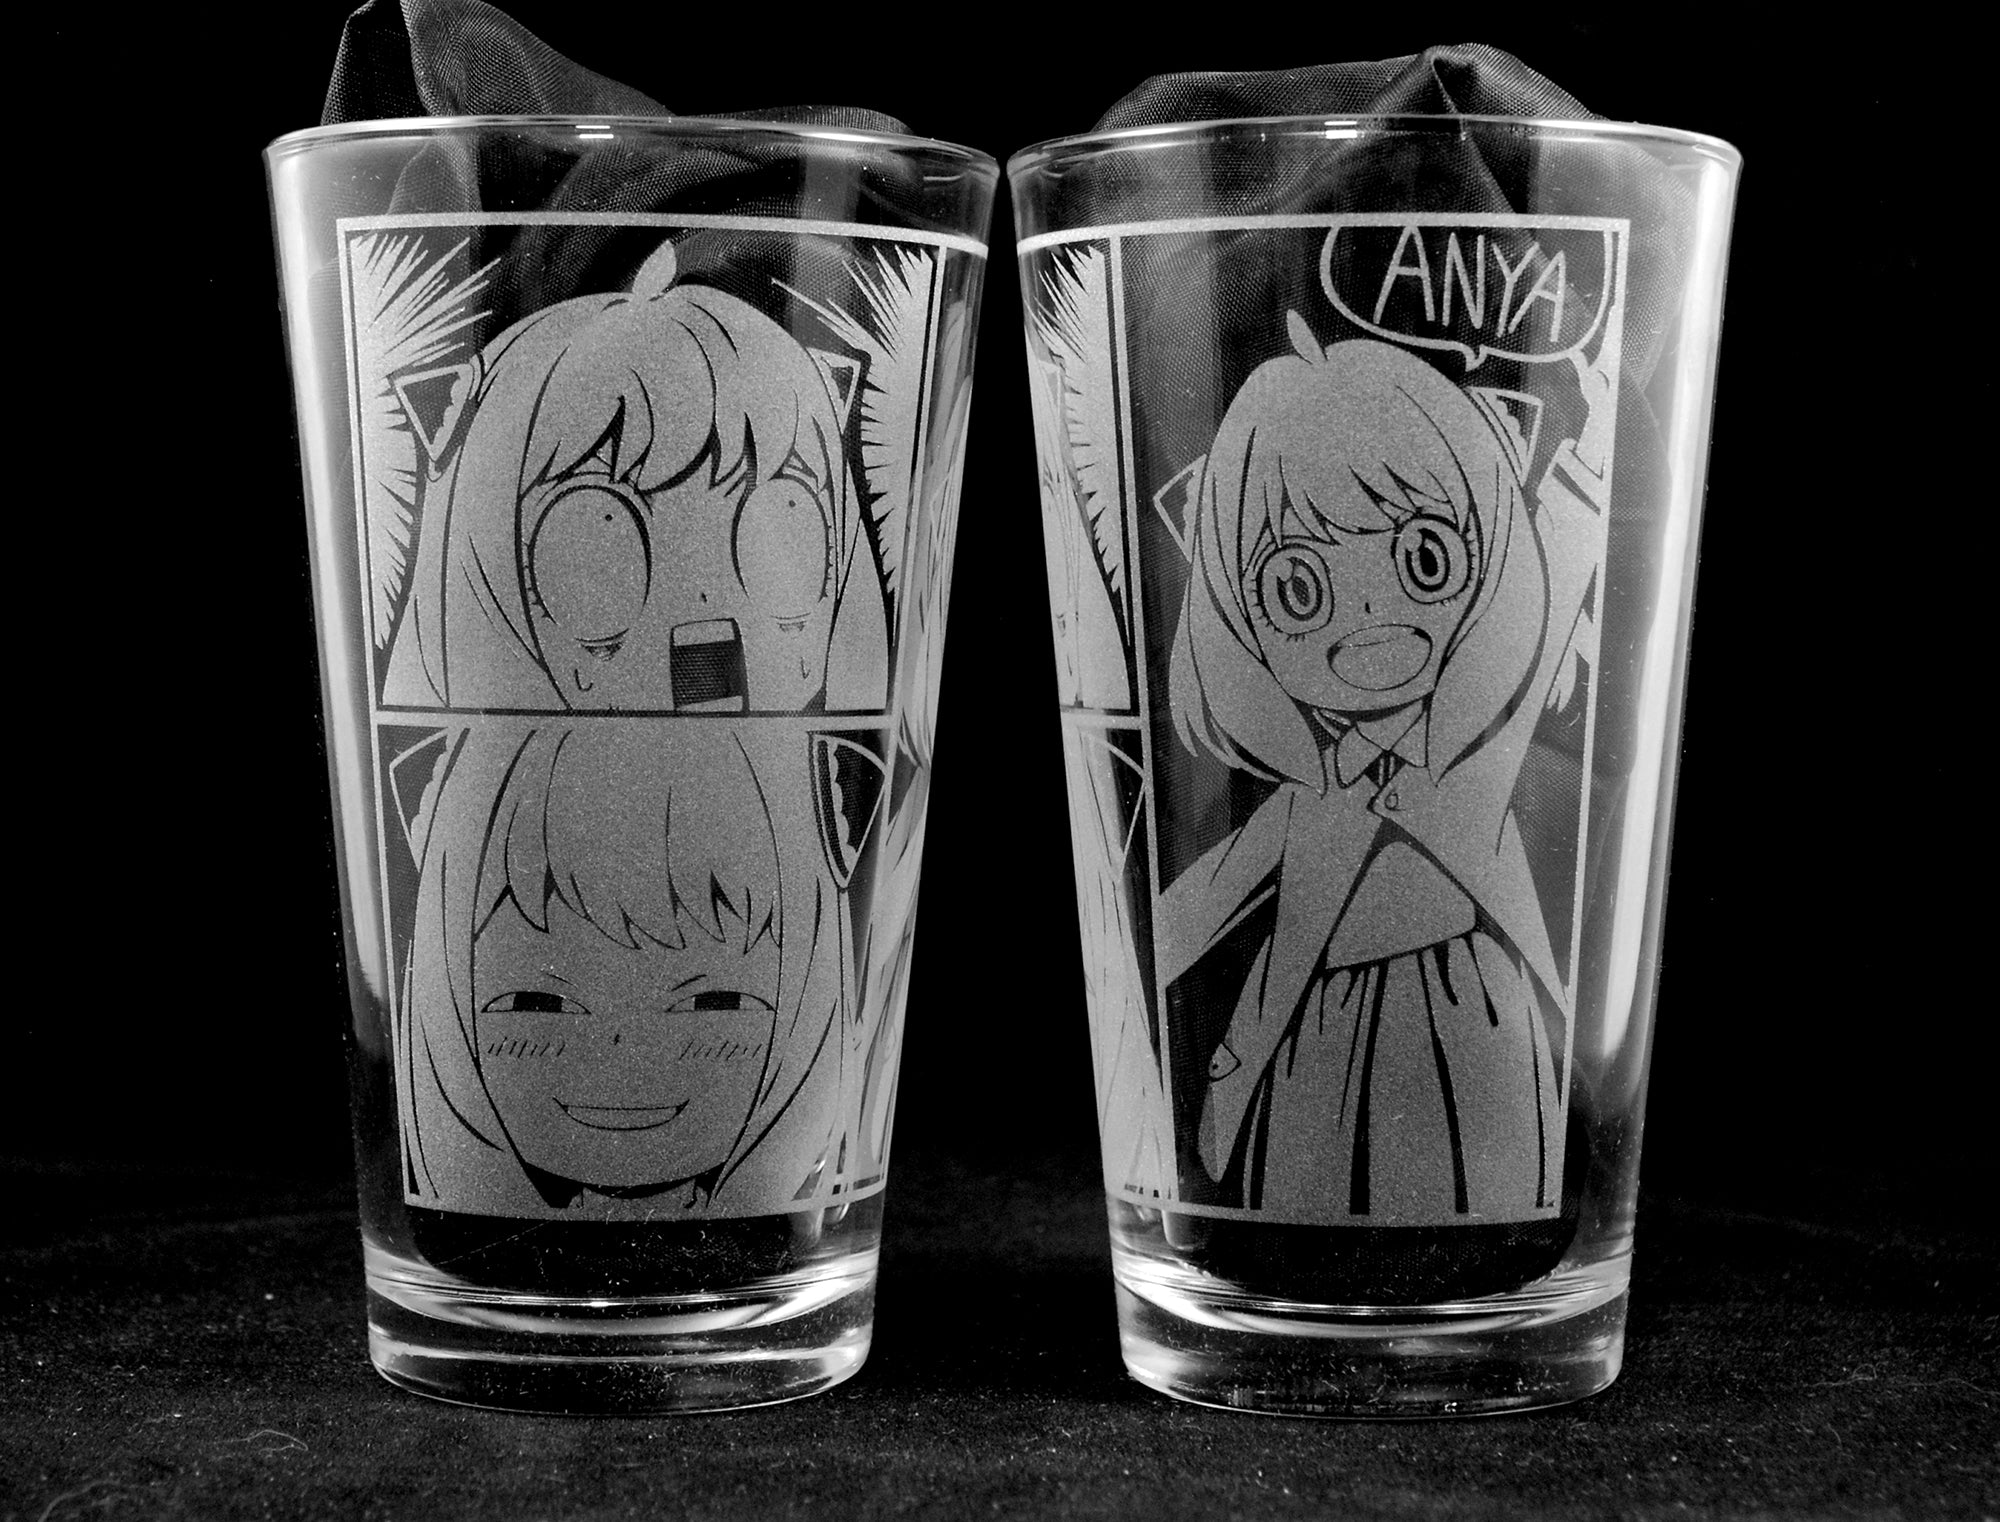 Anya from SpyxFamily Laser Engraved Pint Glass